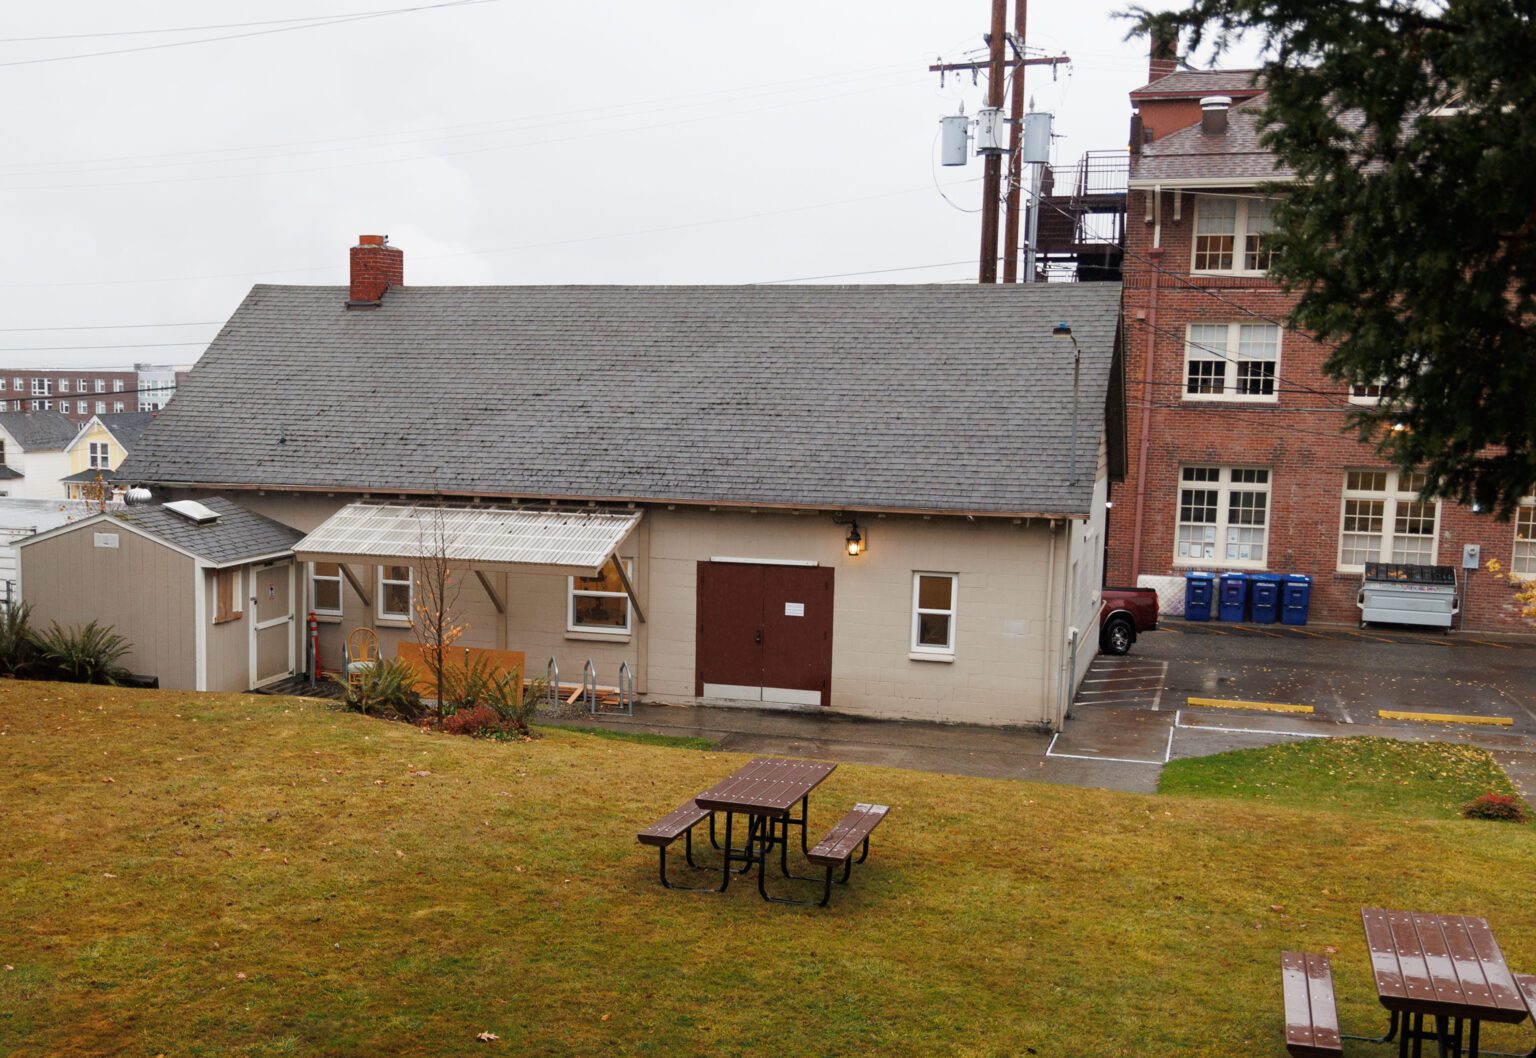 YWCA Bellingham will run an eight-bed homeless shelter for women in a residential building on the grounds at First Presbyterian Church at 1031 N. Garden St. in Bellingham. YWCA's main facility